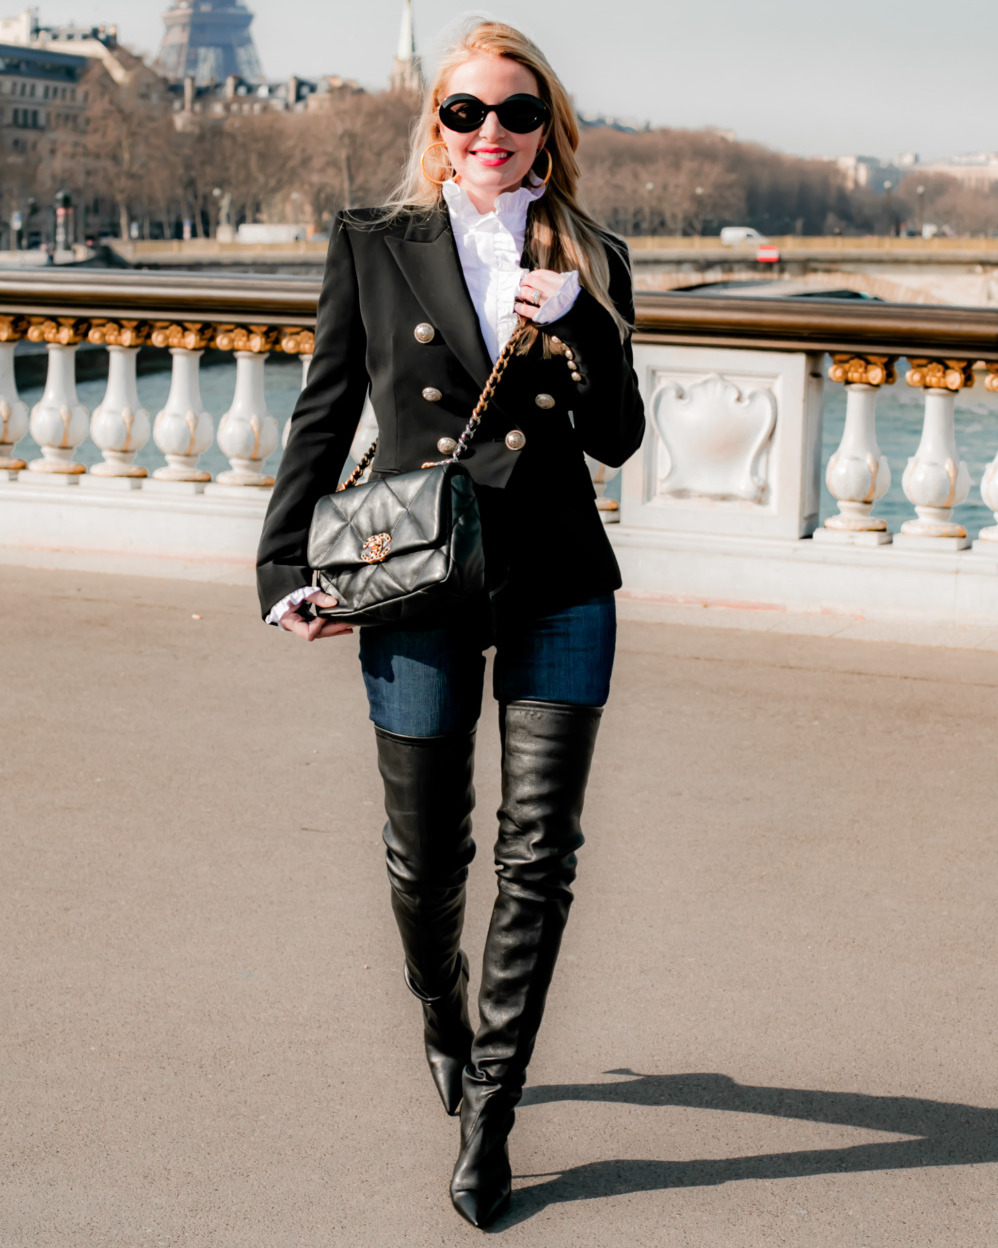 Blazer & Jeans spring outfit in Paris